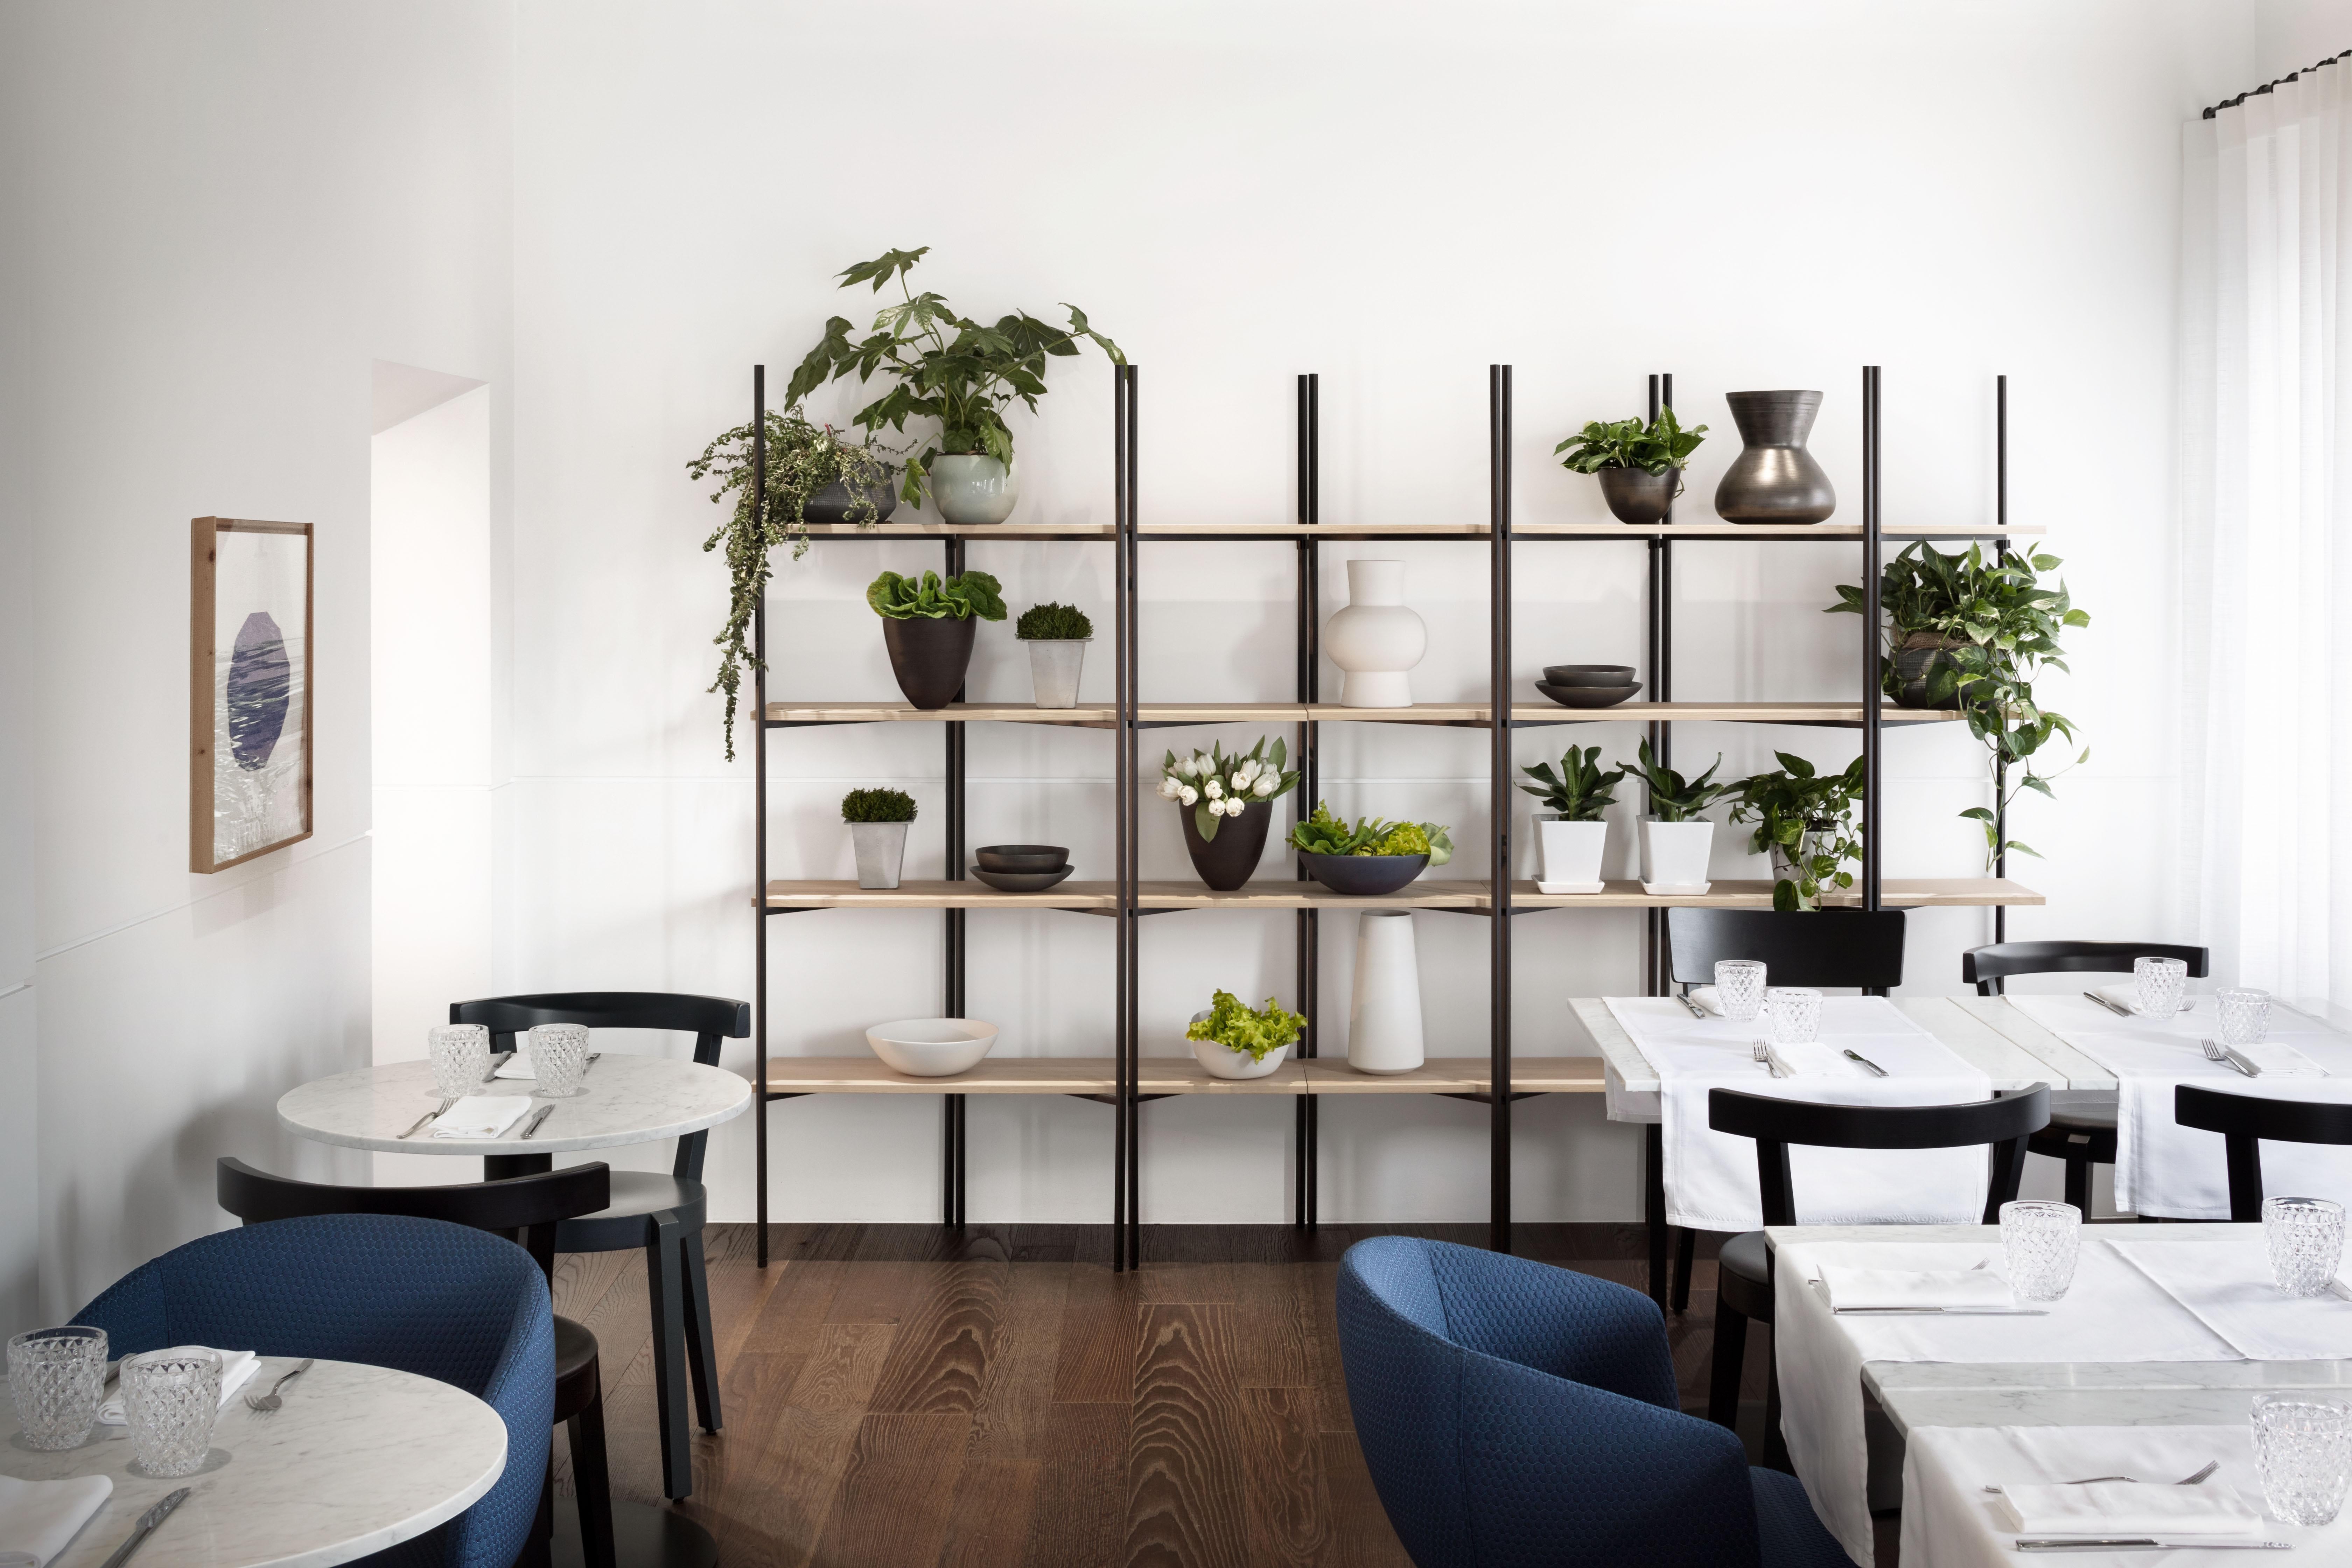 This is a very flexible shelving system that can suit any type of space. With a simple shifting in the assembling of the shelves, a variety of possible configurations is available, different in terms of shape and dimensions: linear, on a corner or